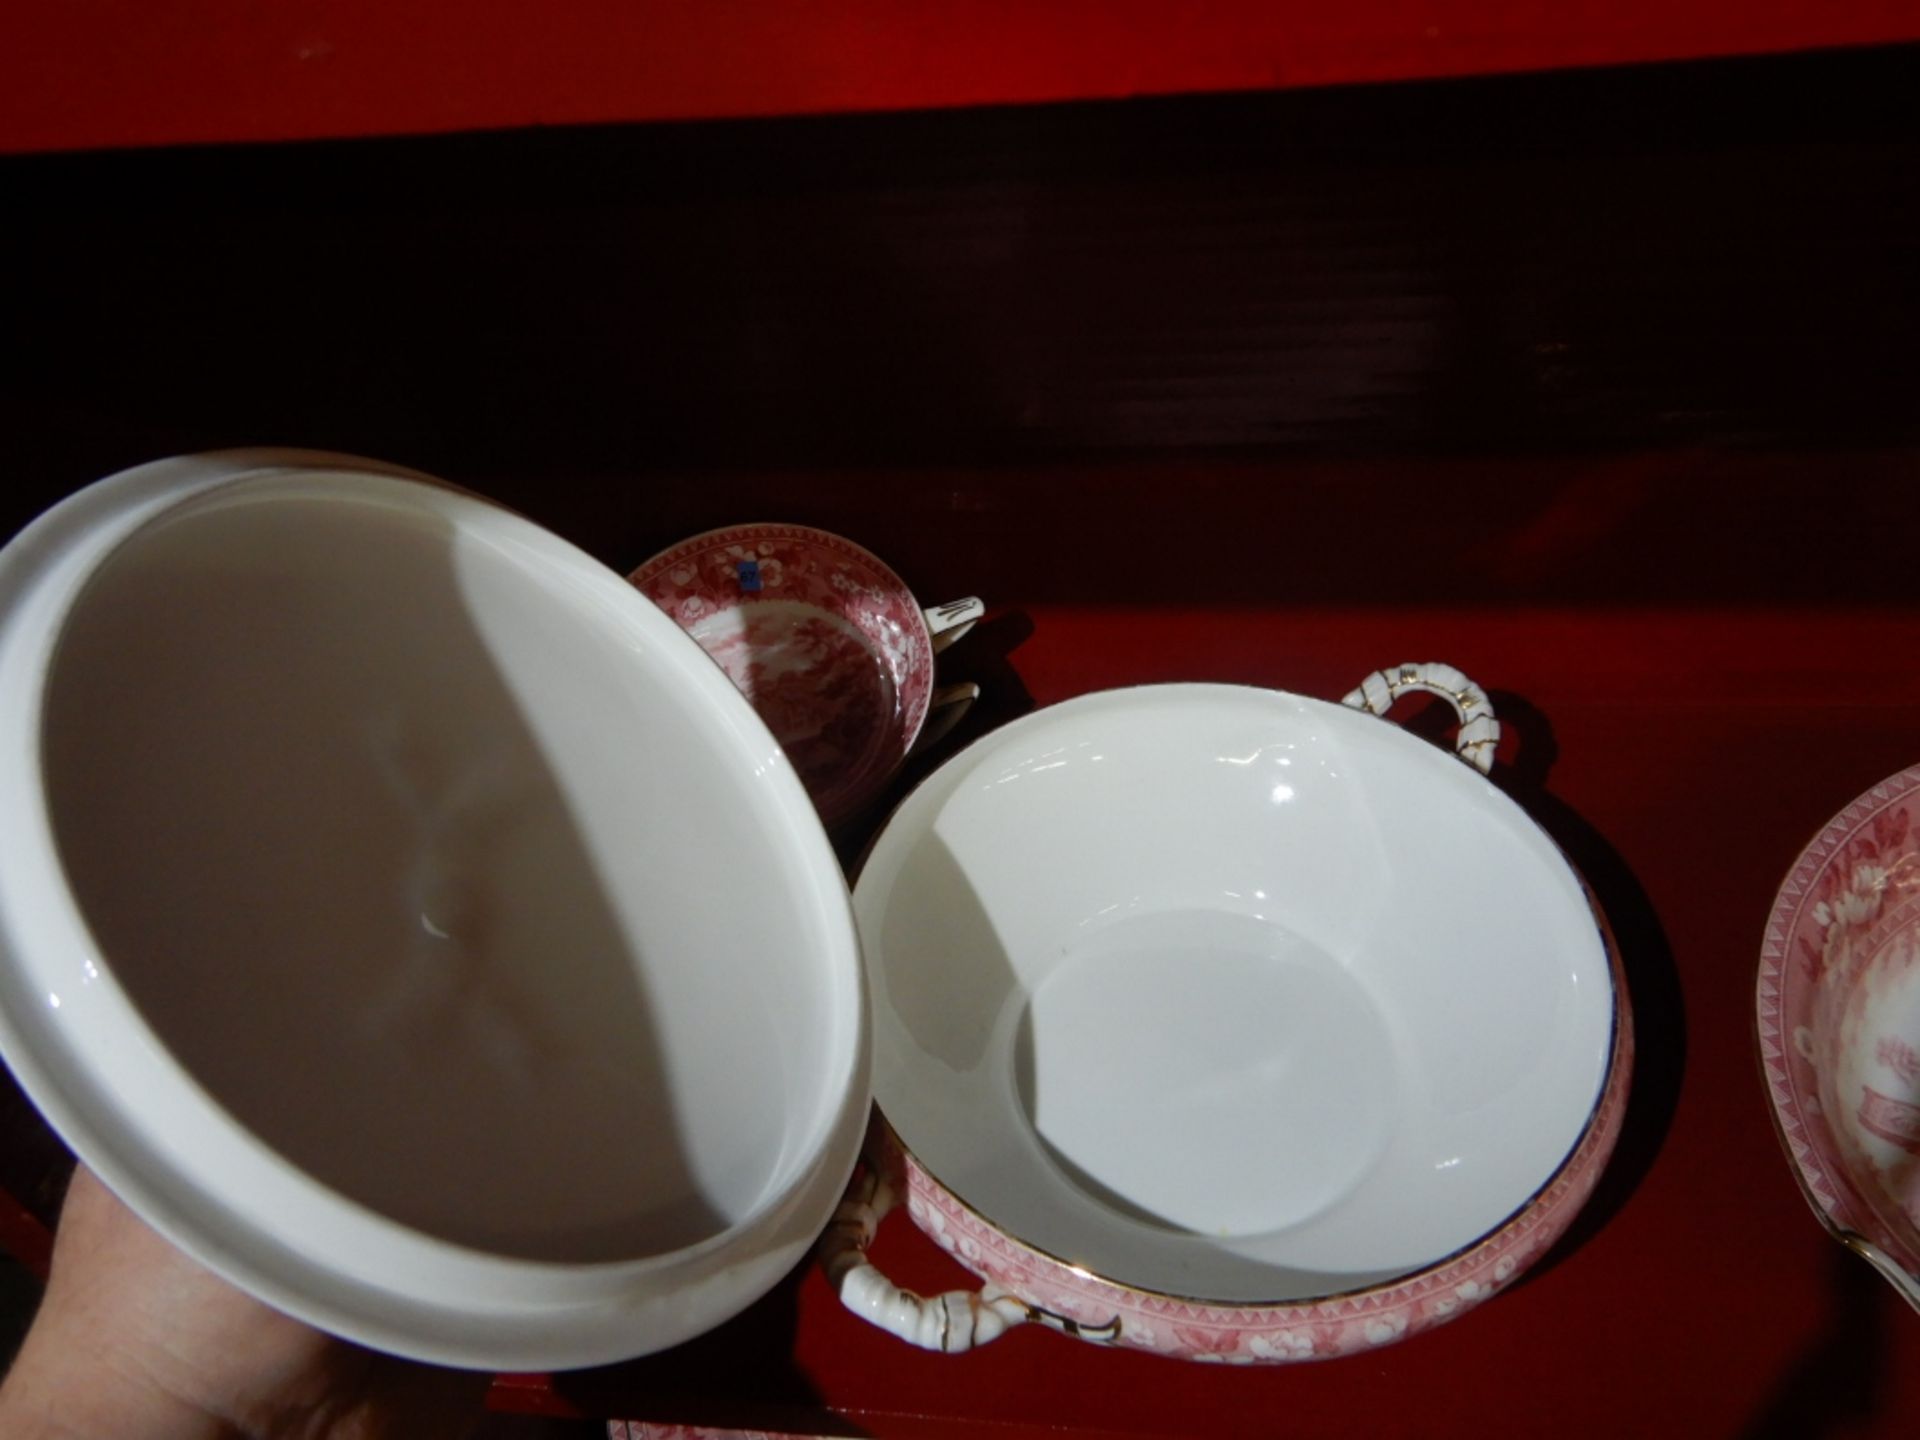 ANTIQUE "RADFORD TOWER" CHINA - COMPLETE DISH & CUP SET - Image 5 of 23